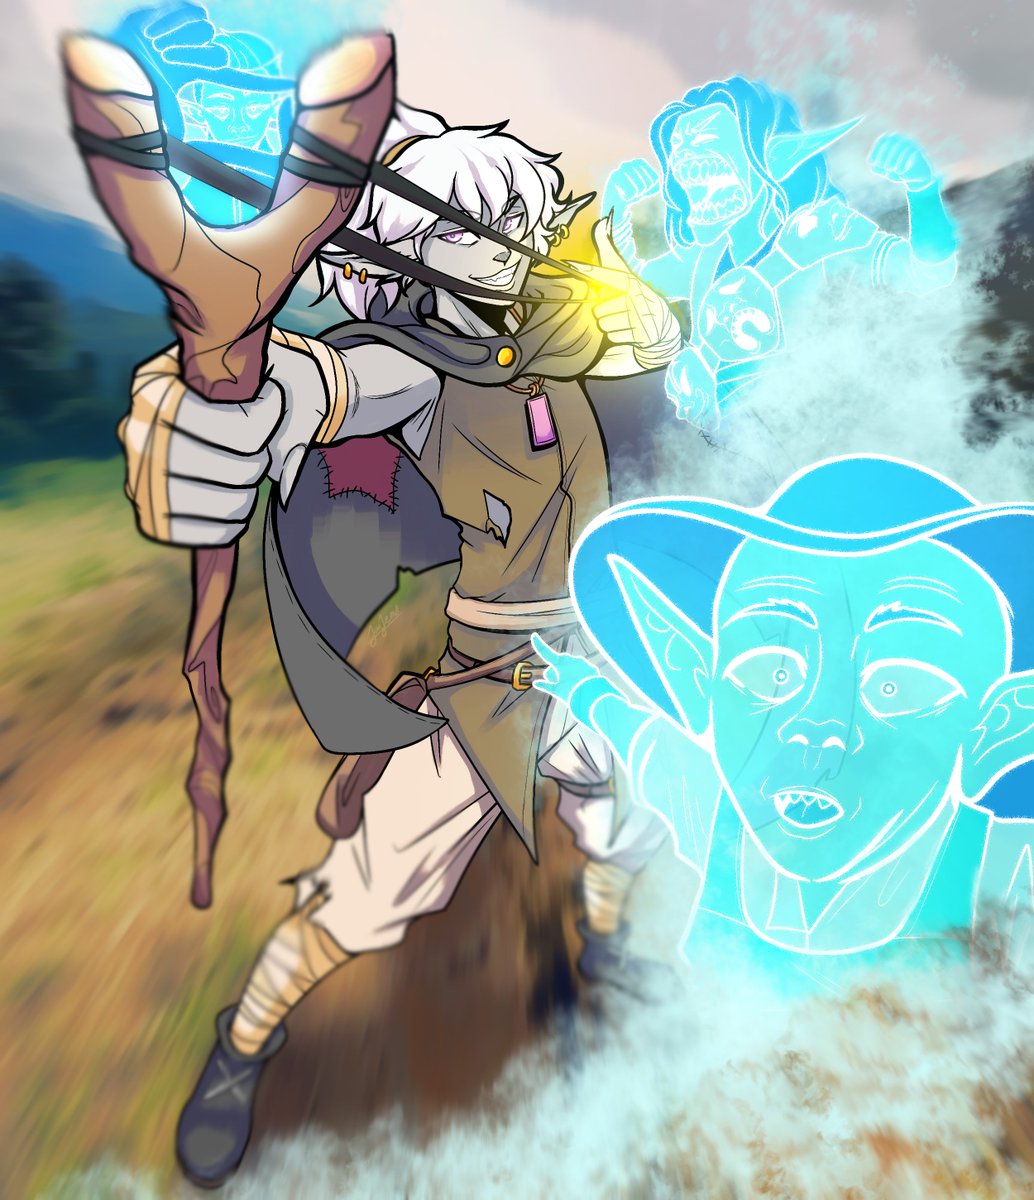 Behold a fantastic and amazing scene of Neep looking like a badass! Also here he is accompanied by his ghostly goblin friends Bako, Saloo and Th'waate (based on three great Eberron creators). @JanJems_1210 created a spectacular scene! #Eberron #hobgoblin